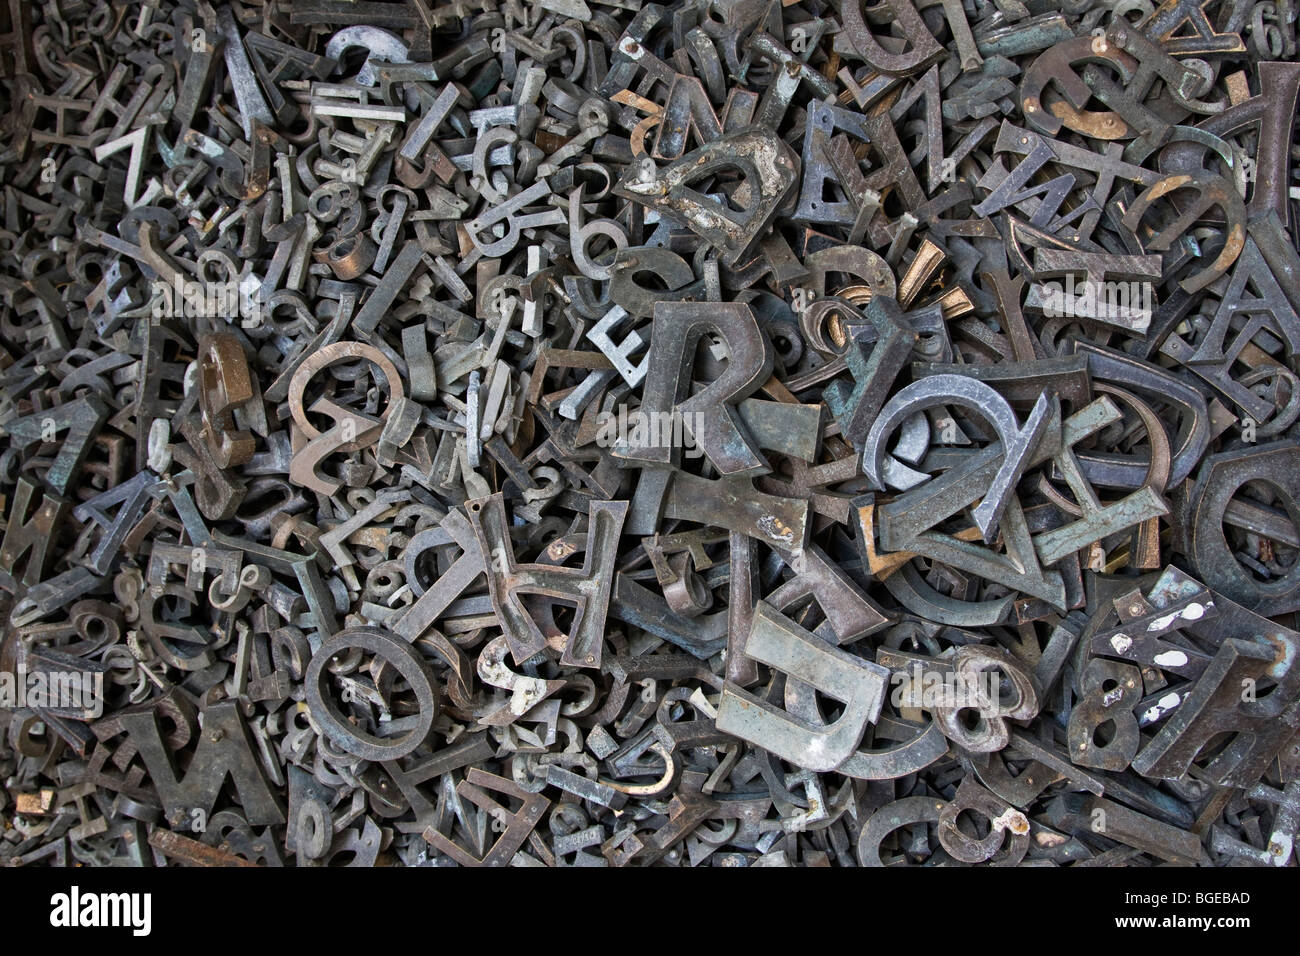 Stamped metal letters in a pile. Stock Photo